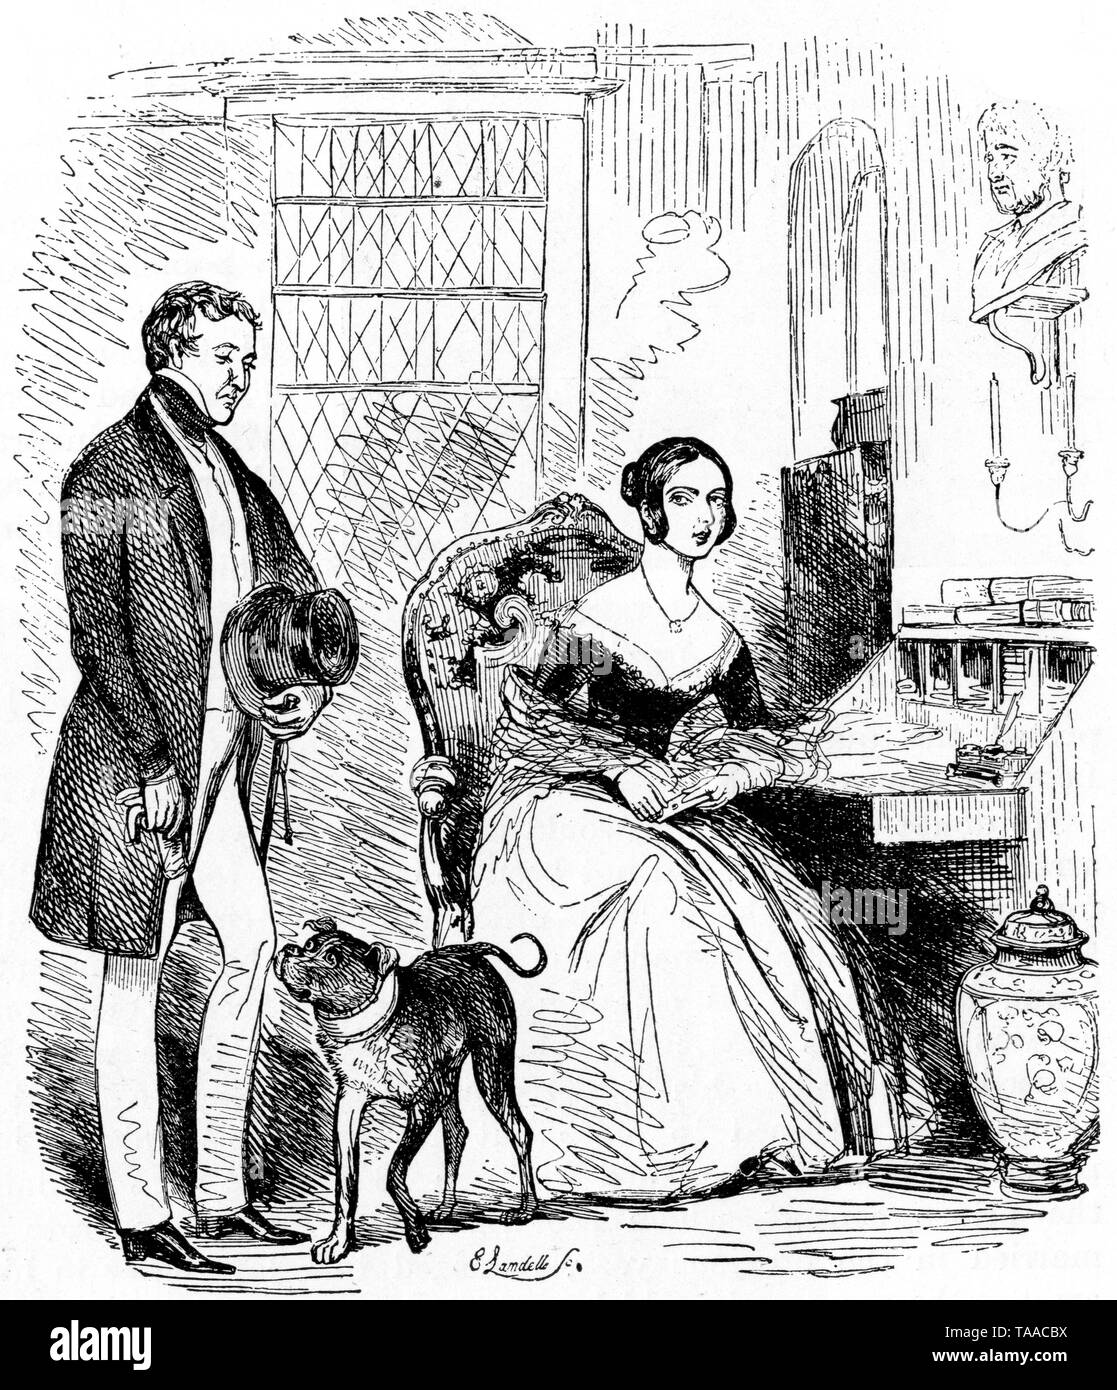 'The Letter of Introduction', 1841. By Ebenezer Landells (1808-1860) for 'Punch', 5th September 1841. Sir Robert Peel (1788-1850) being asked to form a government by Queen Victoria (1819-1901). This was Peel's second term as Prime Minister which lasted until 1846. Amongst other things Peel is remembered for helping create the modern police force, leading to officers being known as 'Bobbies' (in England) and 'Peelers' (in Northern Ireland). Stock Photo